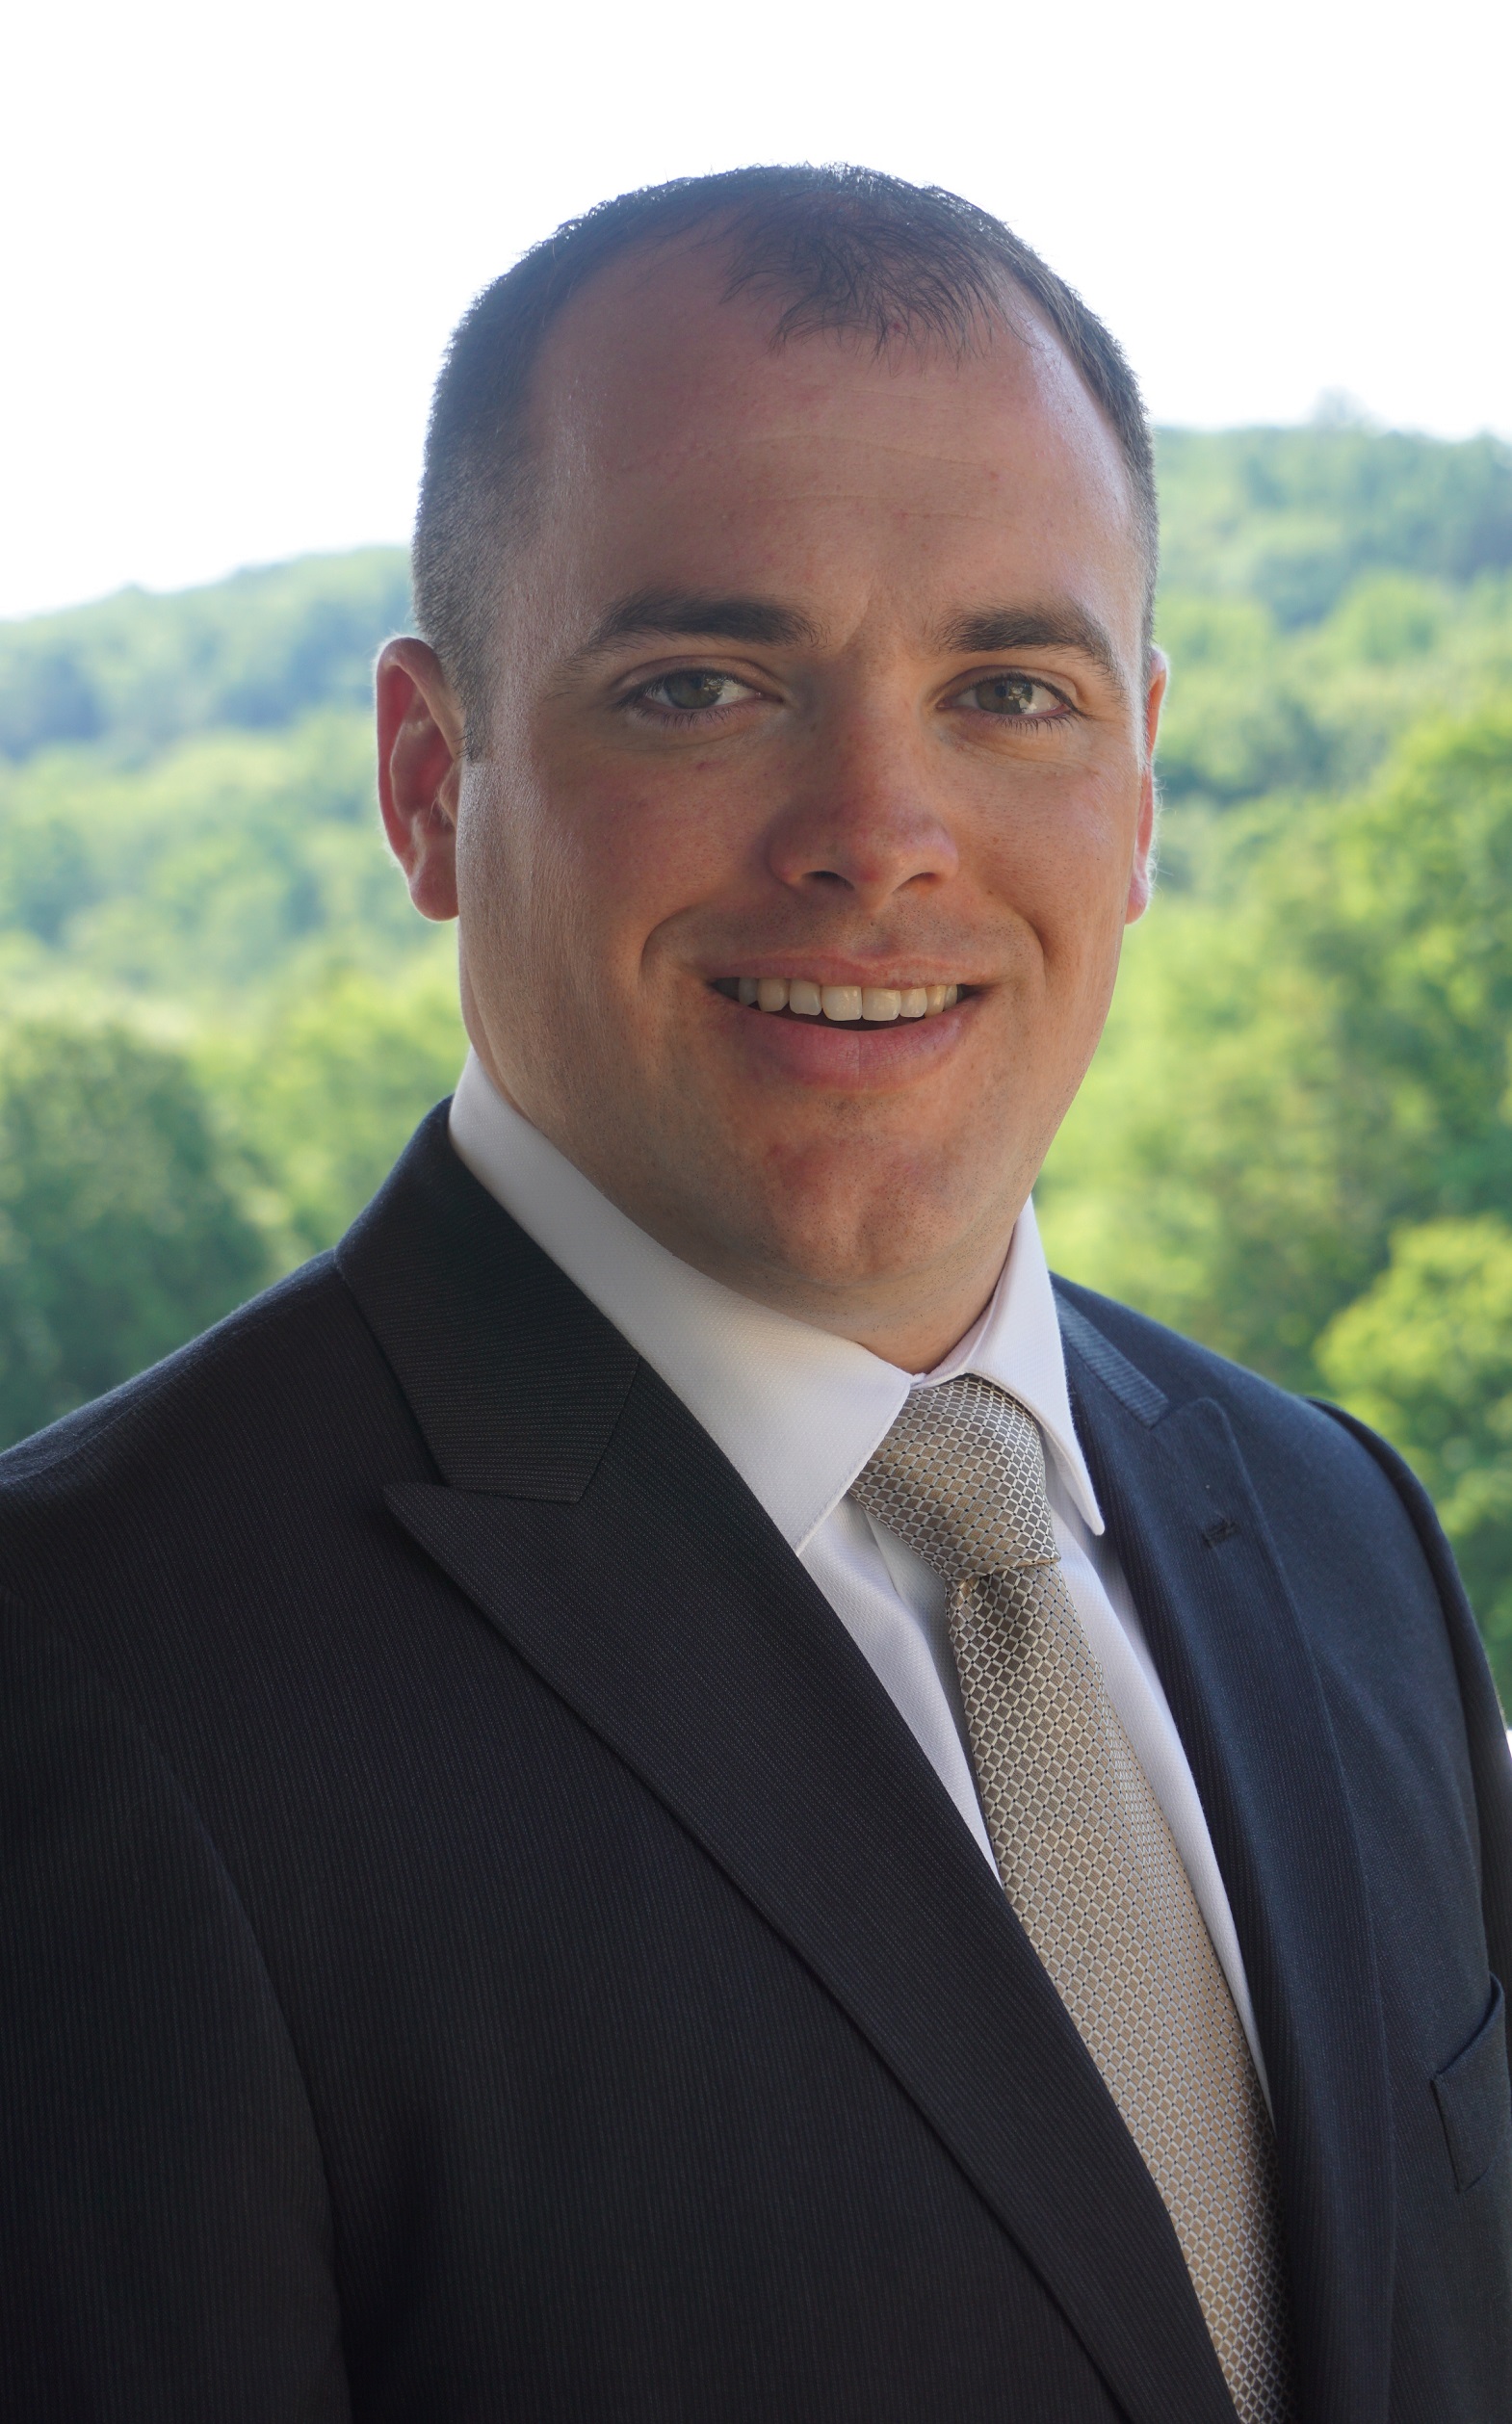 Mike Brown Ziff Law Firm photo - ZiffLaw Welcomes Mike Brown, New Injury And Malpractice Attorney